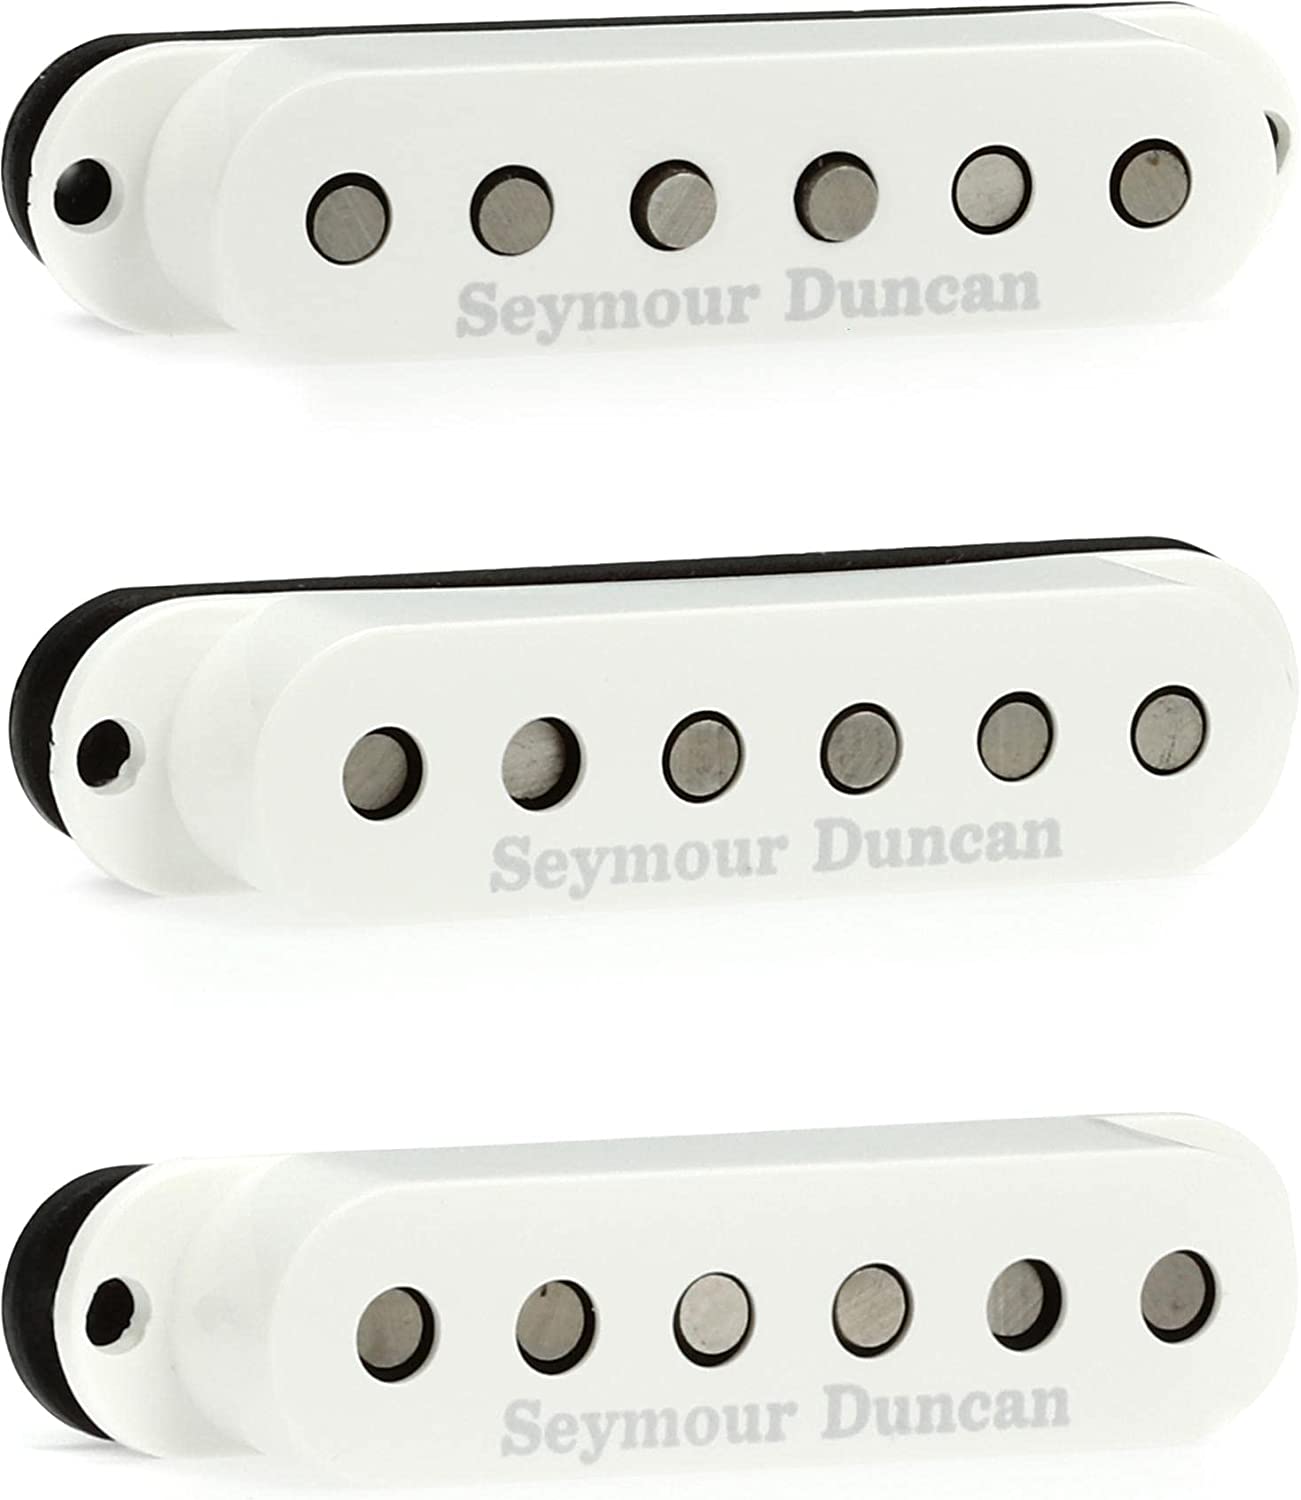 Seymour Duncan SSL-5 Custom Staggered Pole Strat Single Coil Pickup on a white background